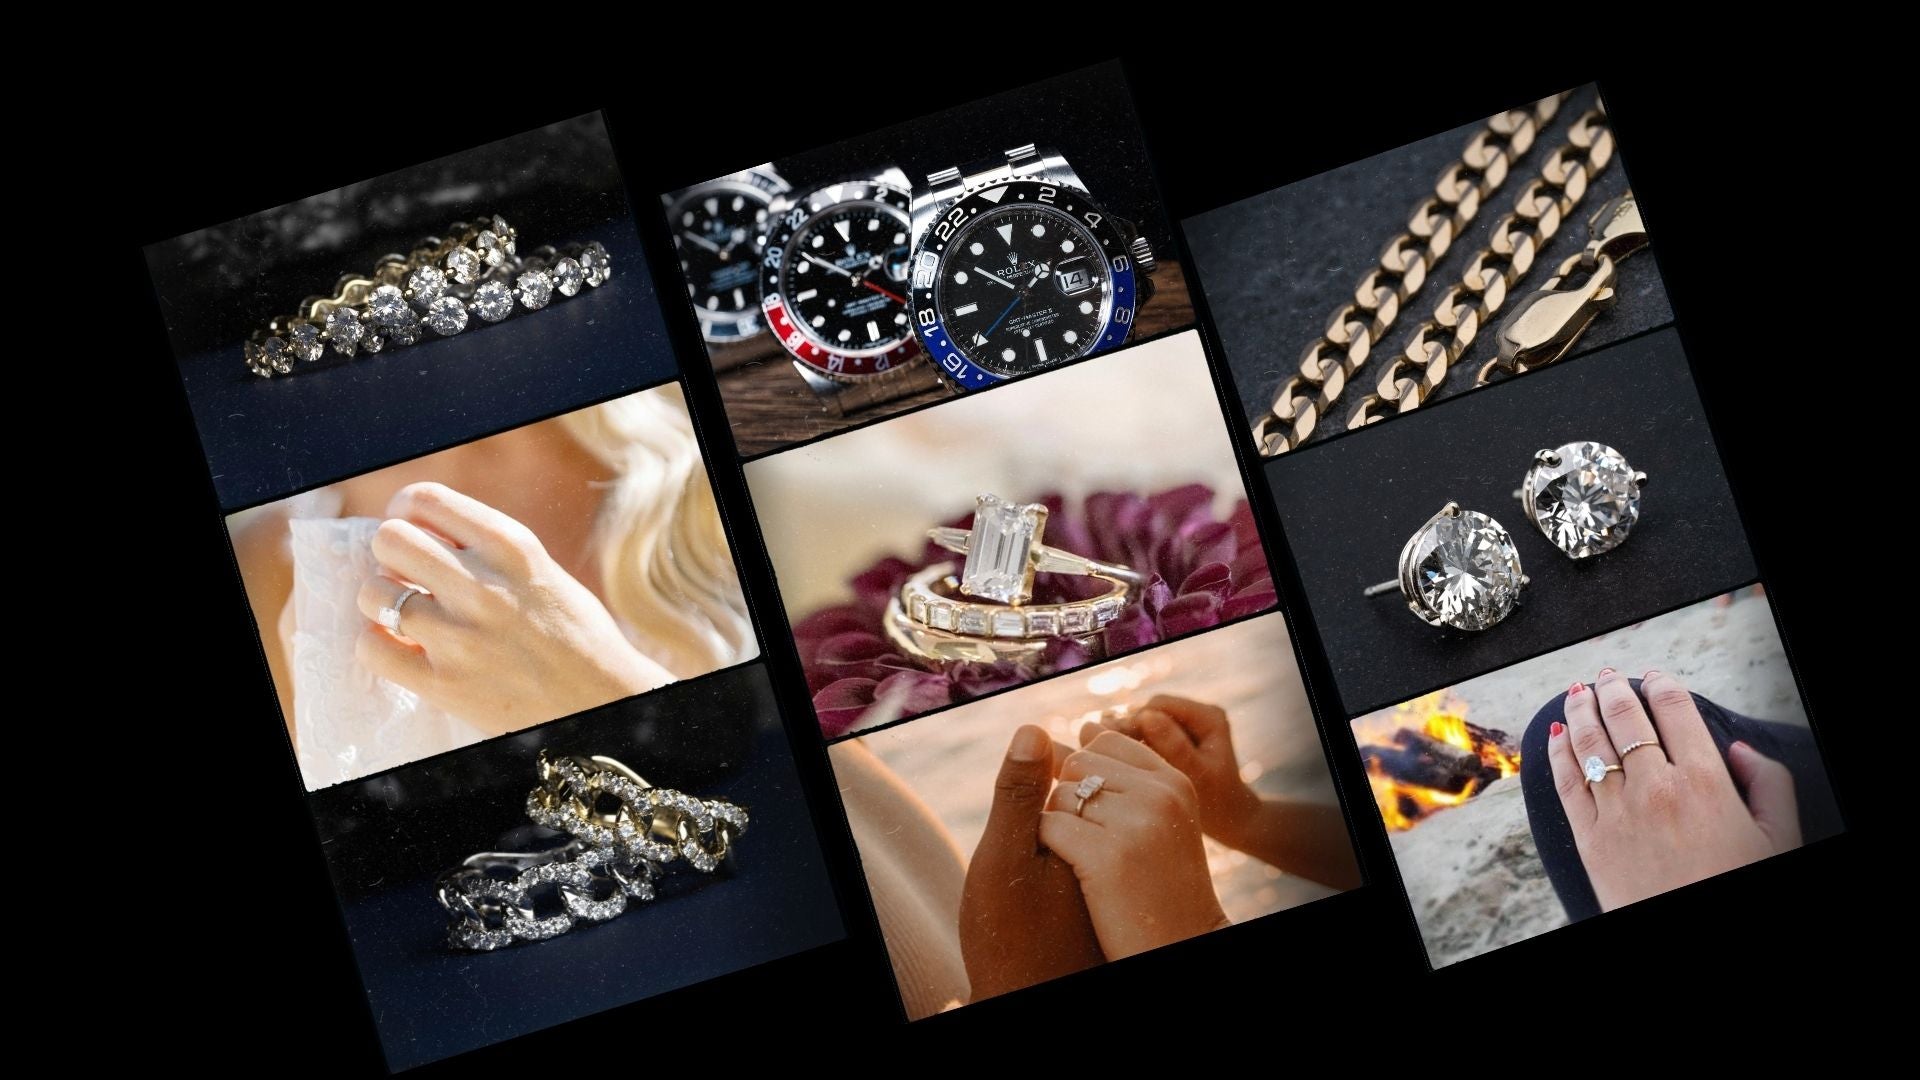 All Fine Jewelry - Jewelry Luxury Collection